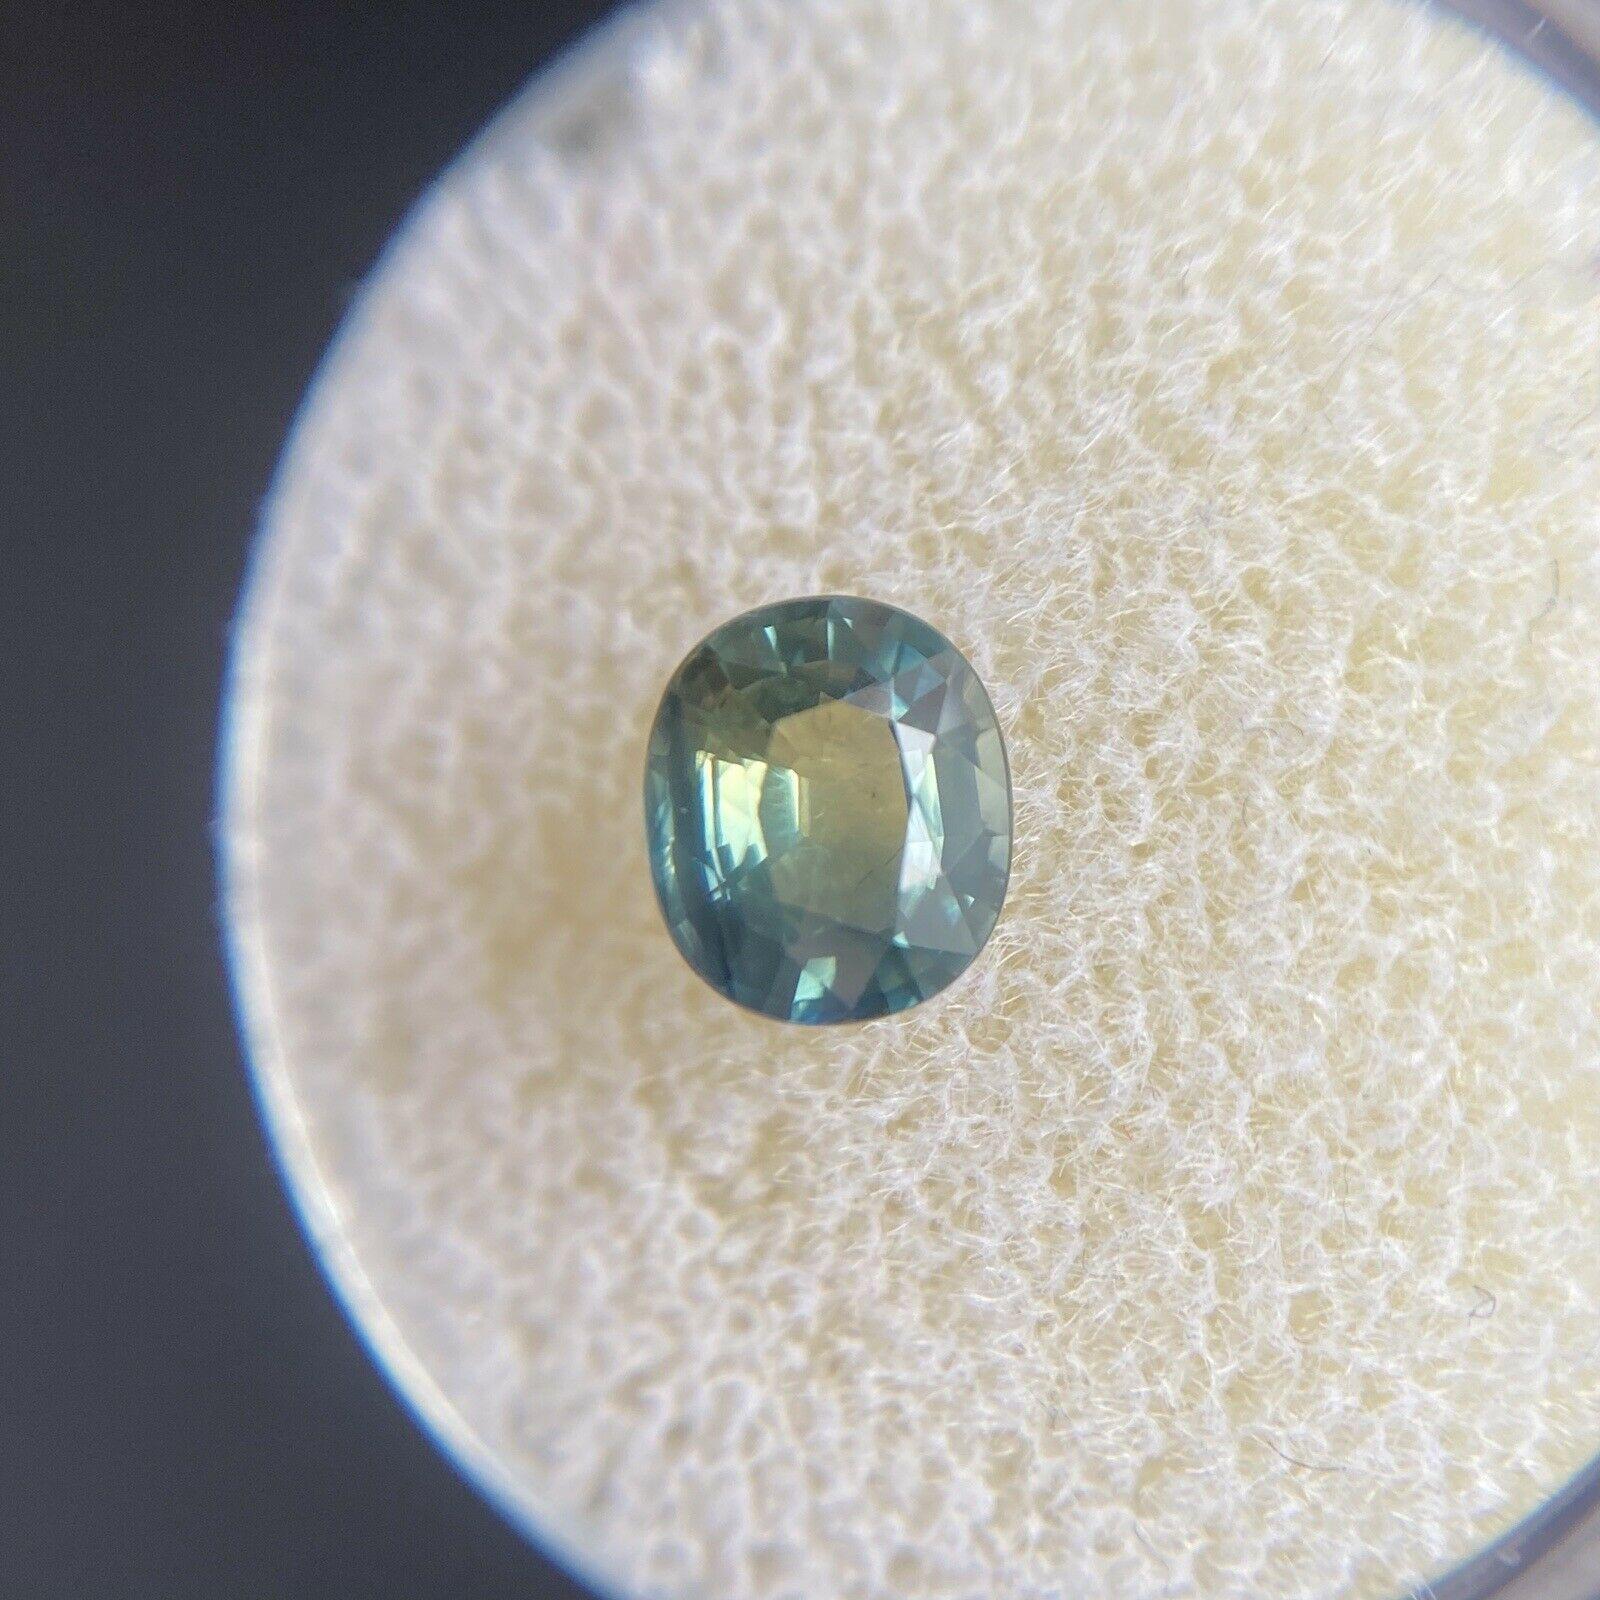 Rare Parti Colour Sapphire 1.22ct Blue Green Yellow Oval Cut Loose Gem For Sale 1